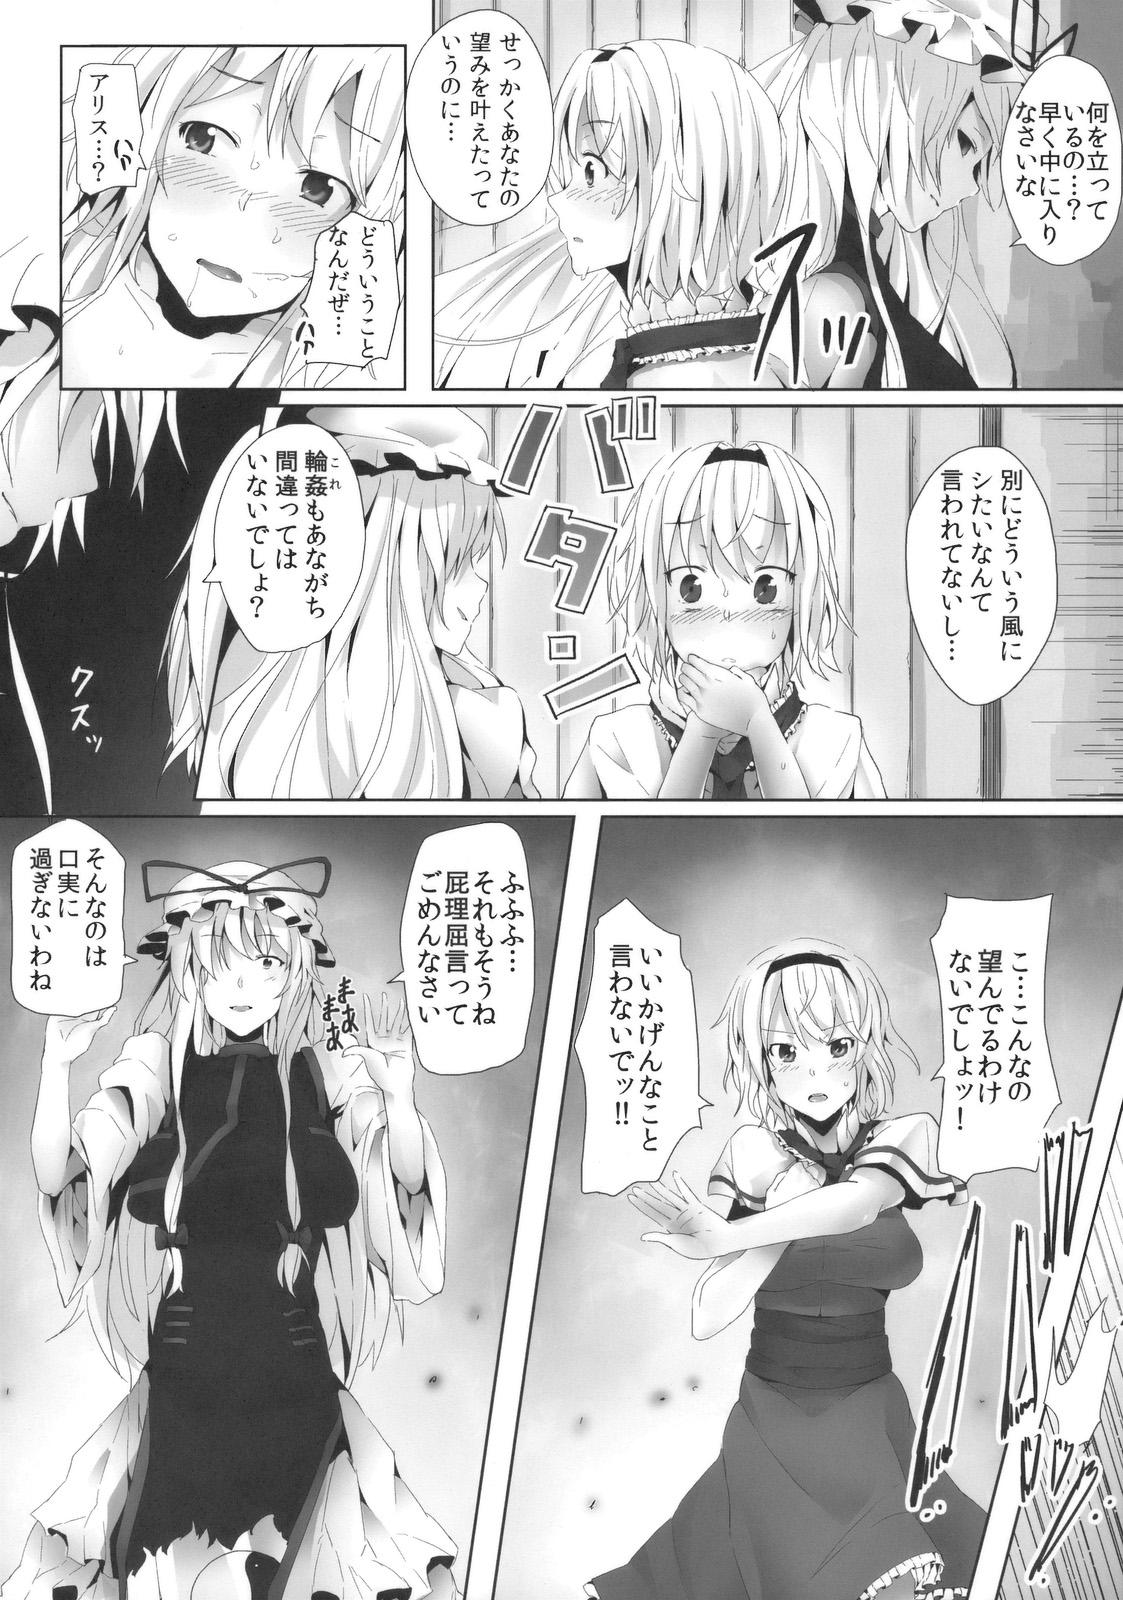 Asians Alice in Underland - Touhou project Teenxxx - Page 6